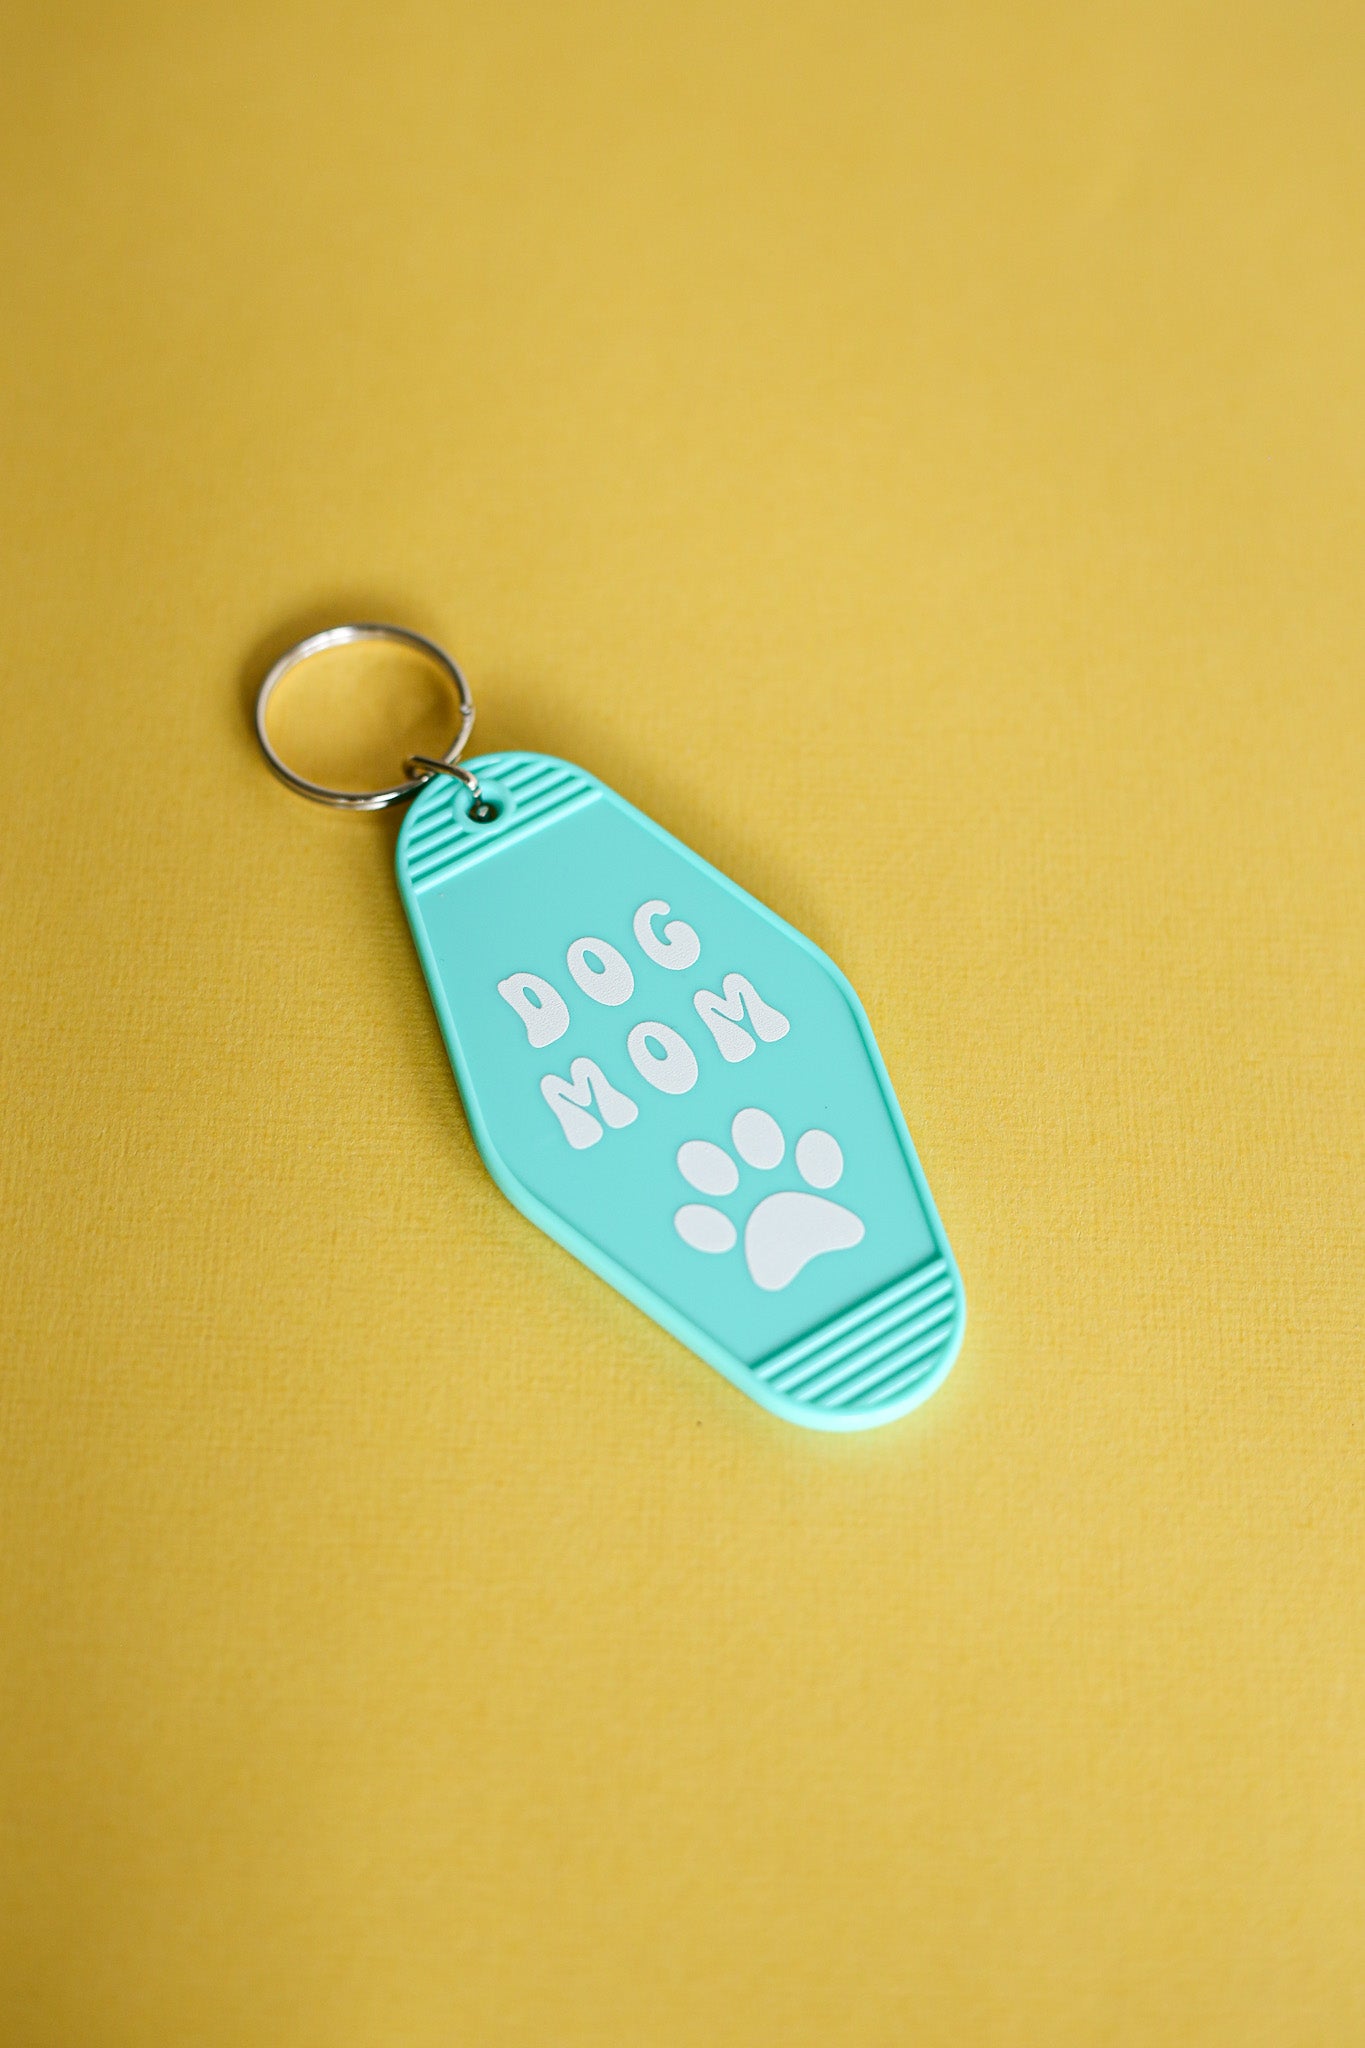 Vintage-Inspired Motel Key Chains | Assorted Designs